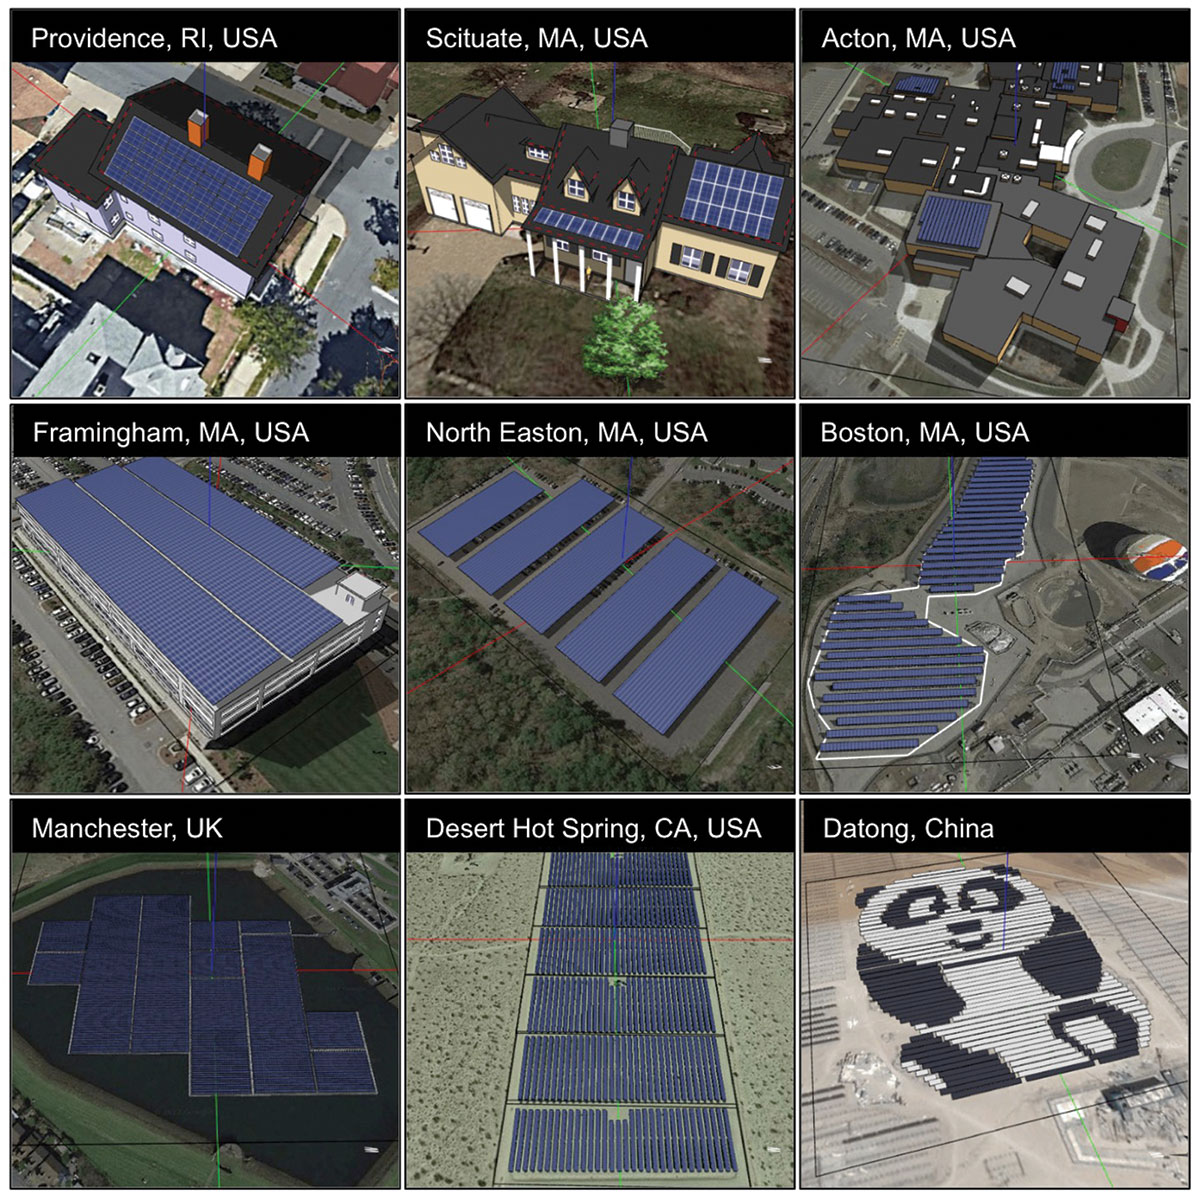 Energy3D can be used to design a wide variety of photovoltaic systems